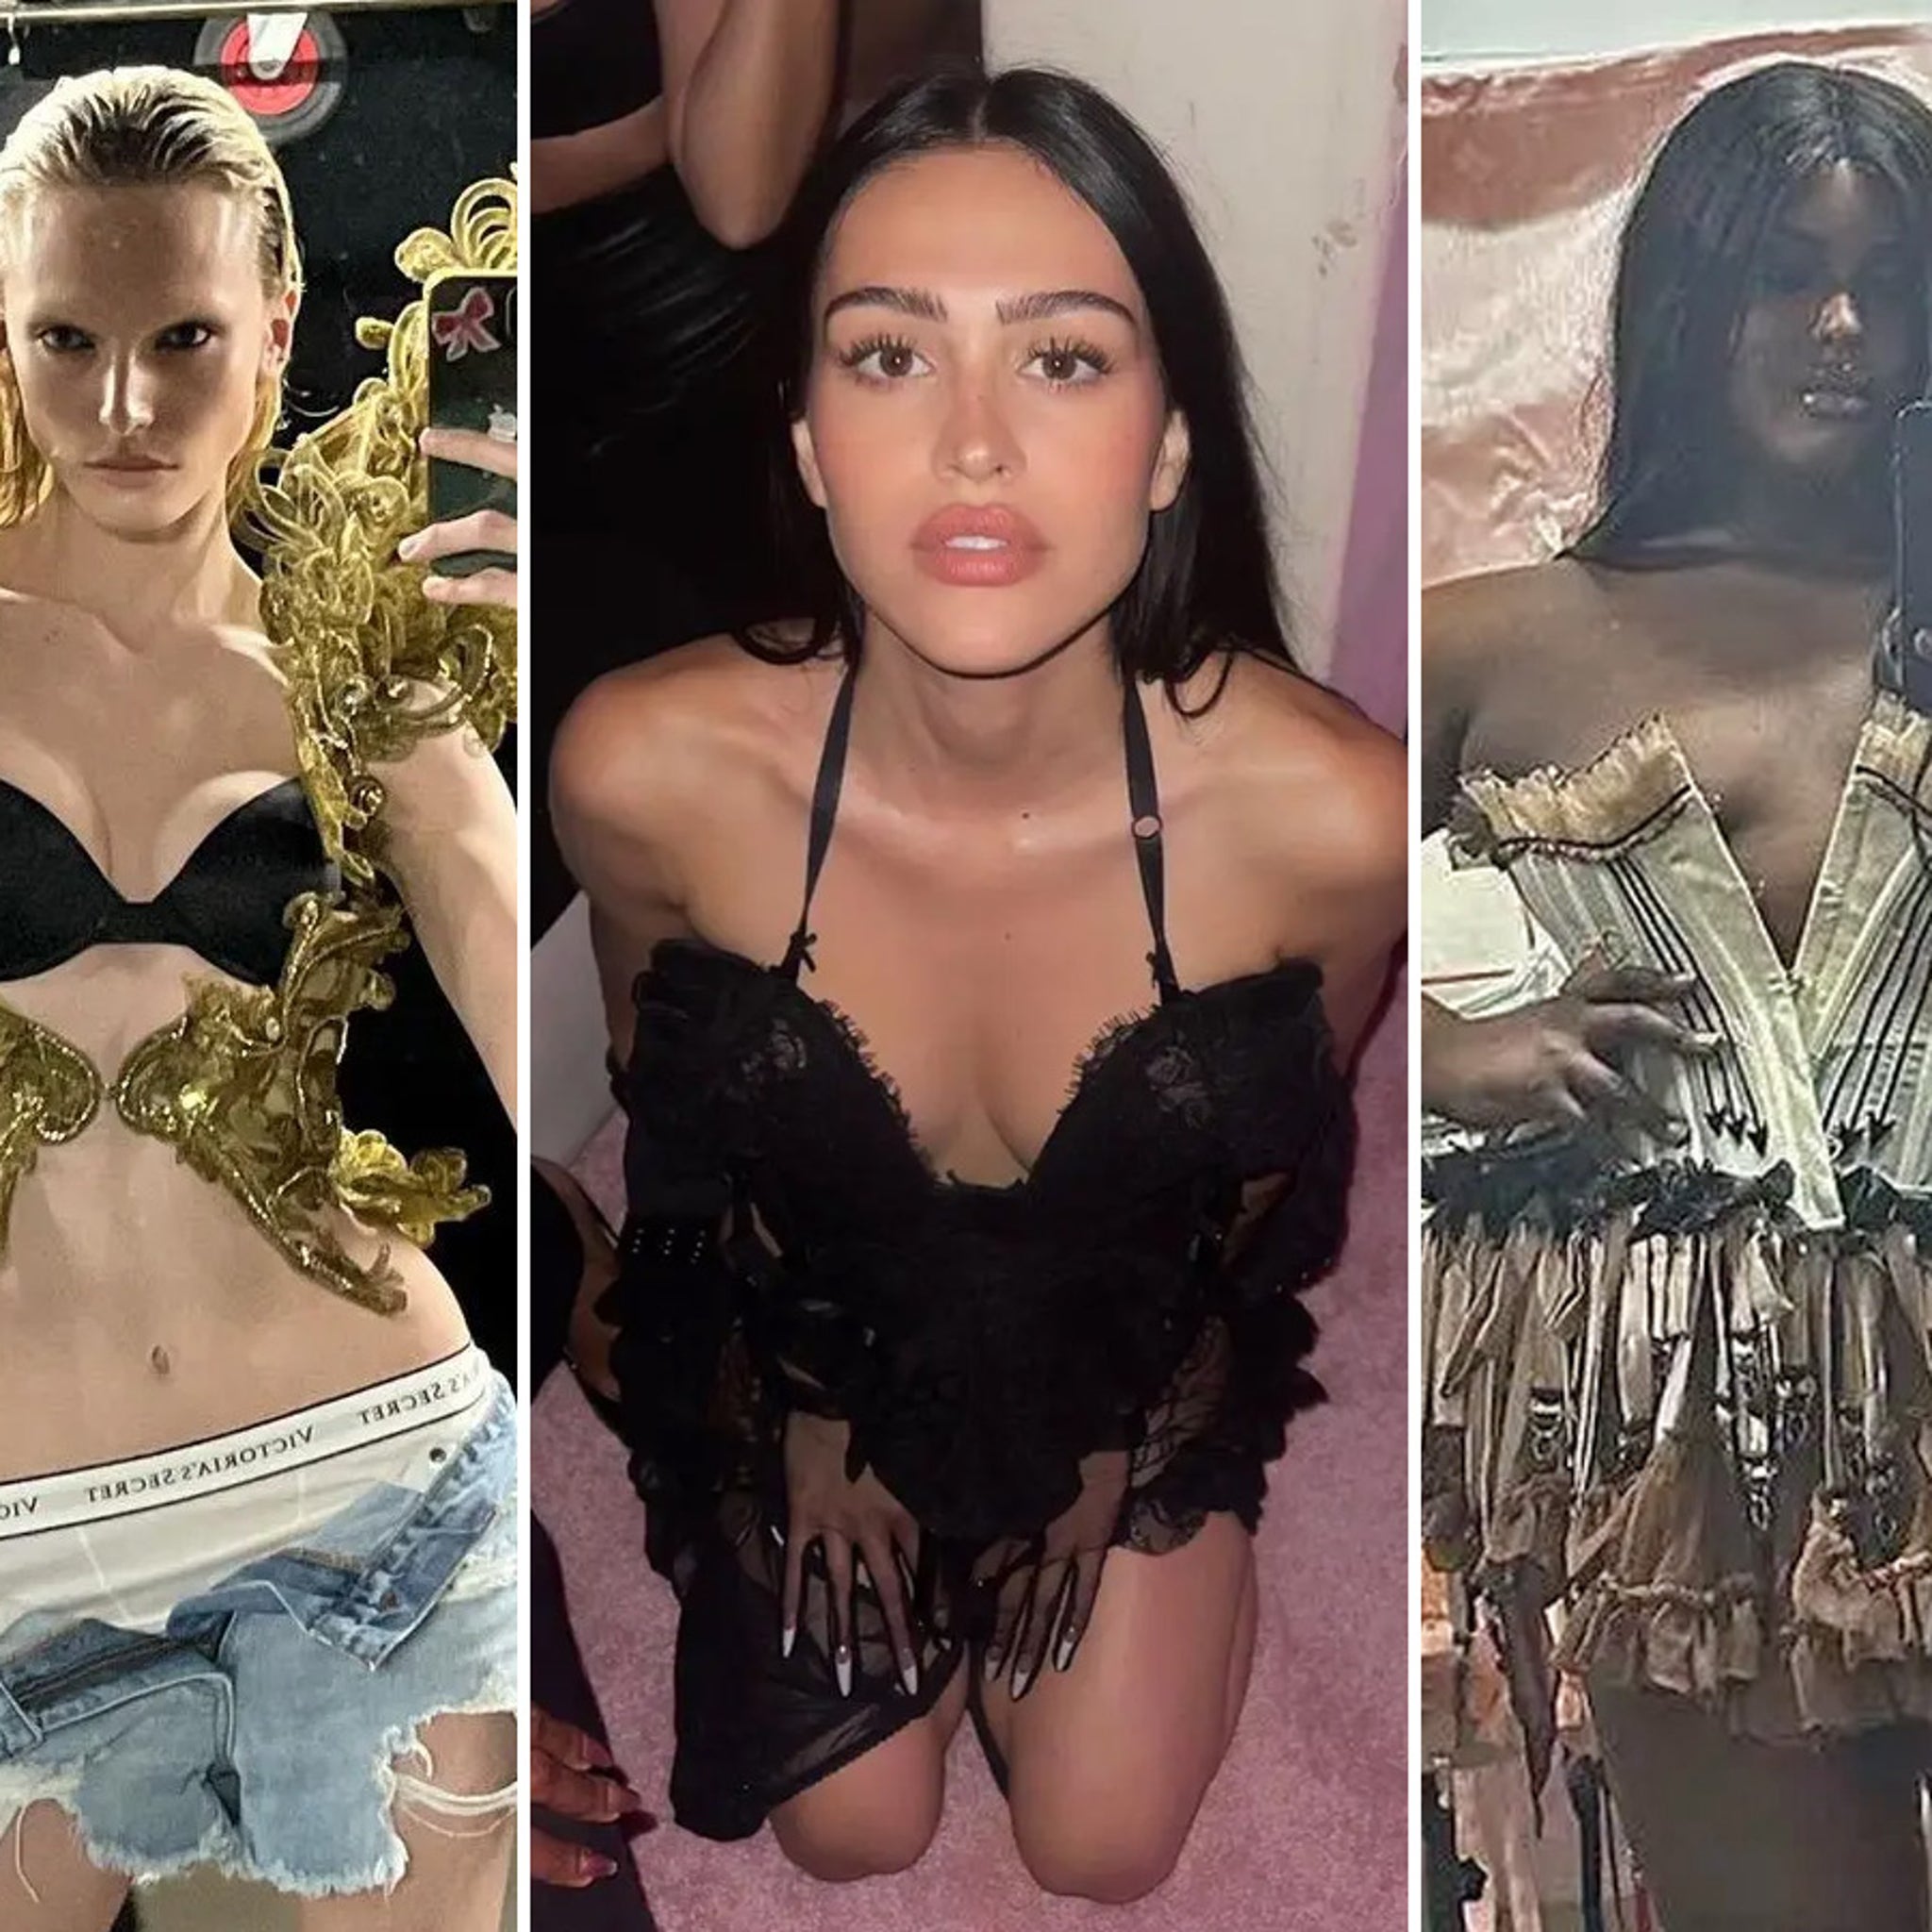 We went behind the scenes of the Victoria's Secret Fashion Show